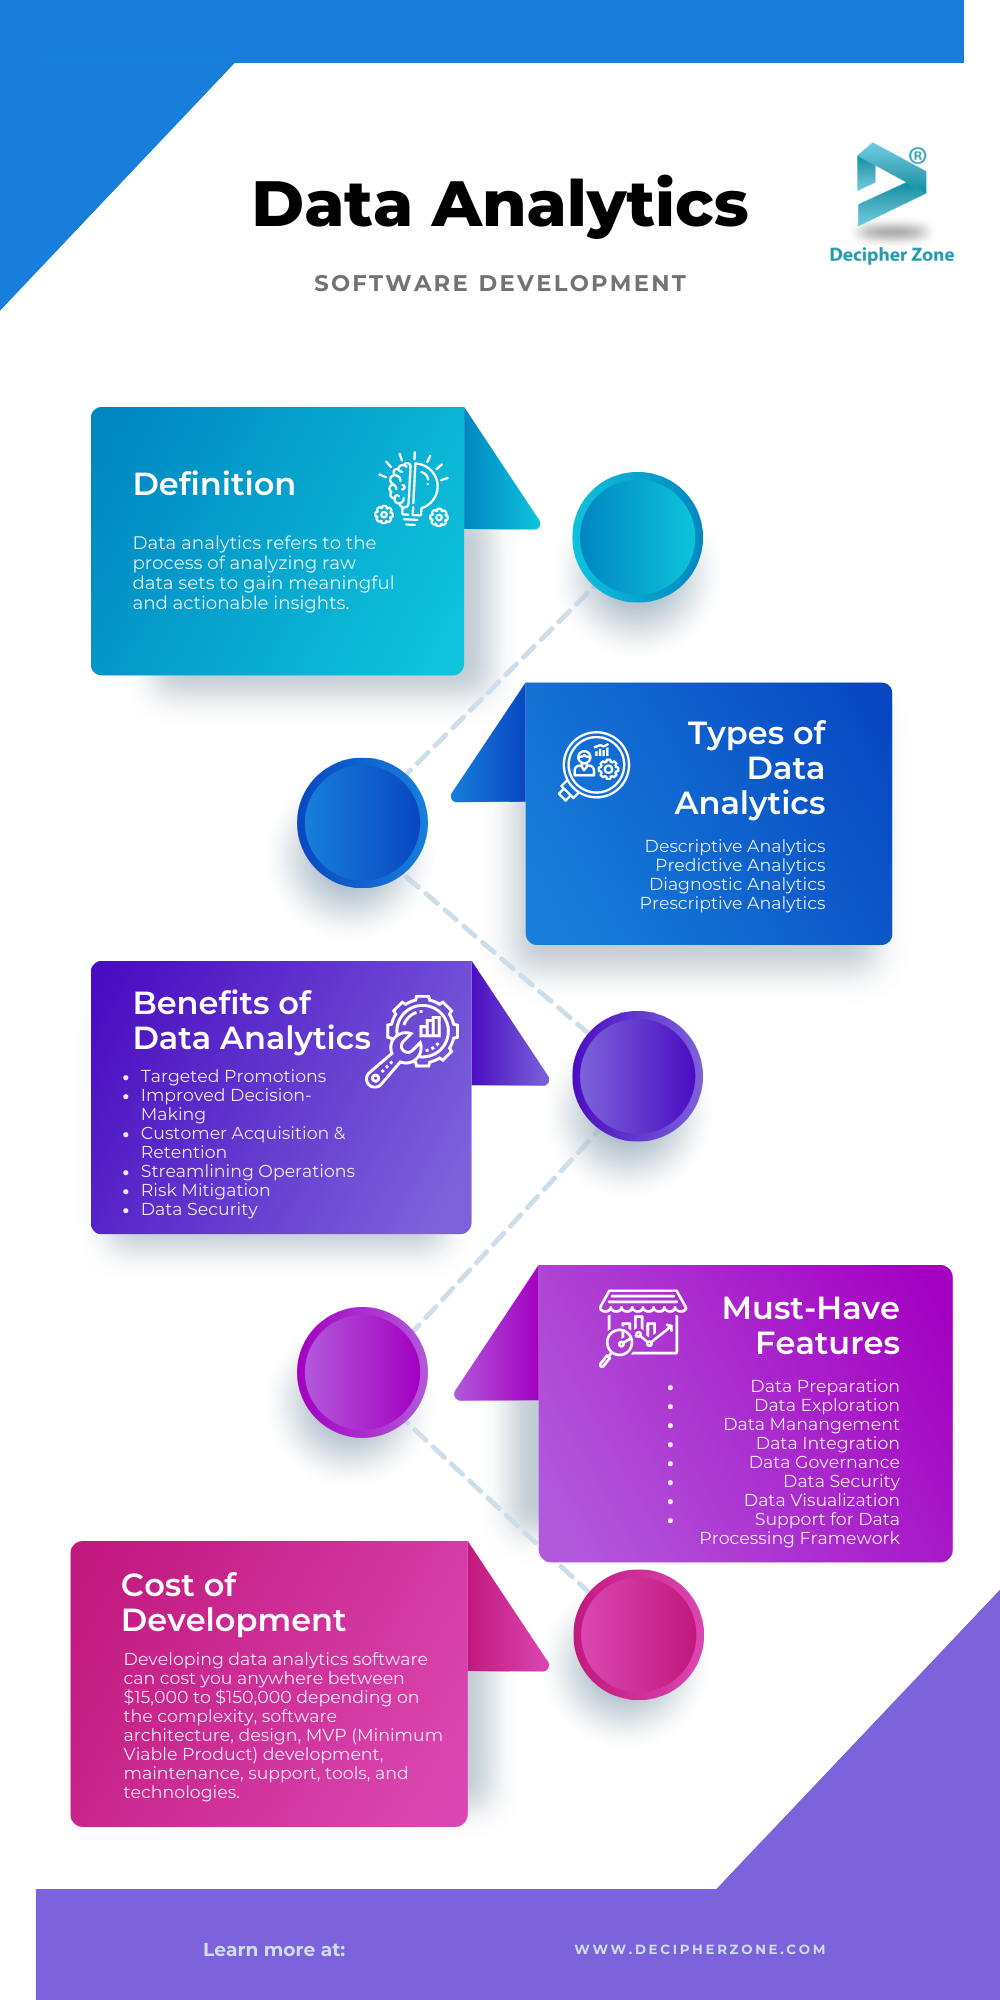 Data Analytics Software Development: Types, Benefits, Features and Cost